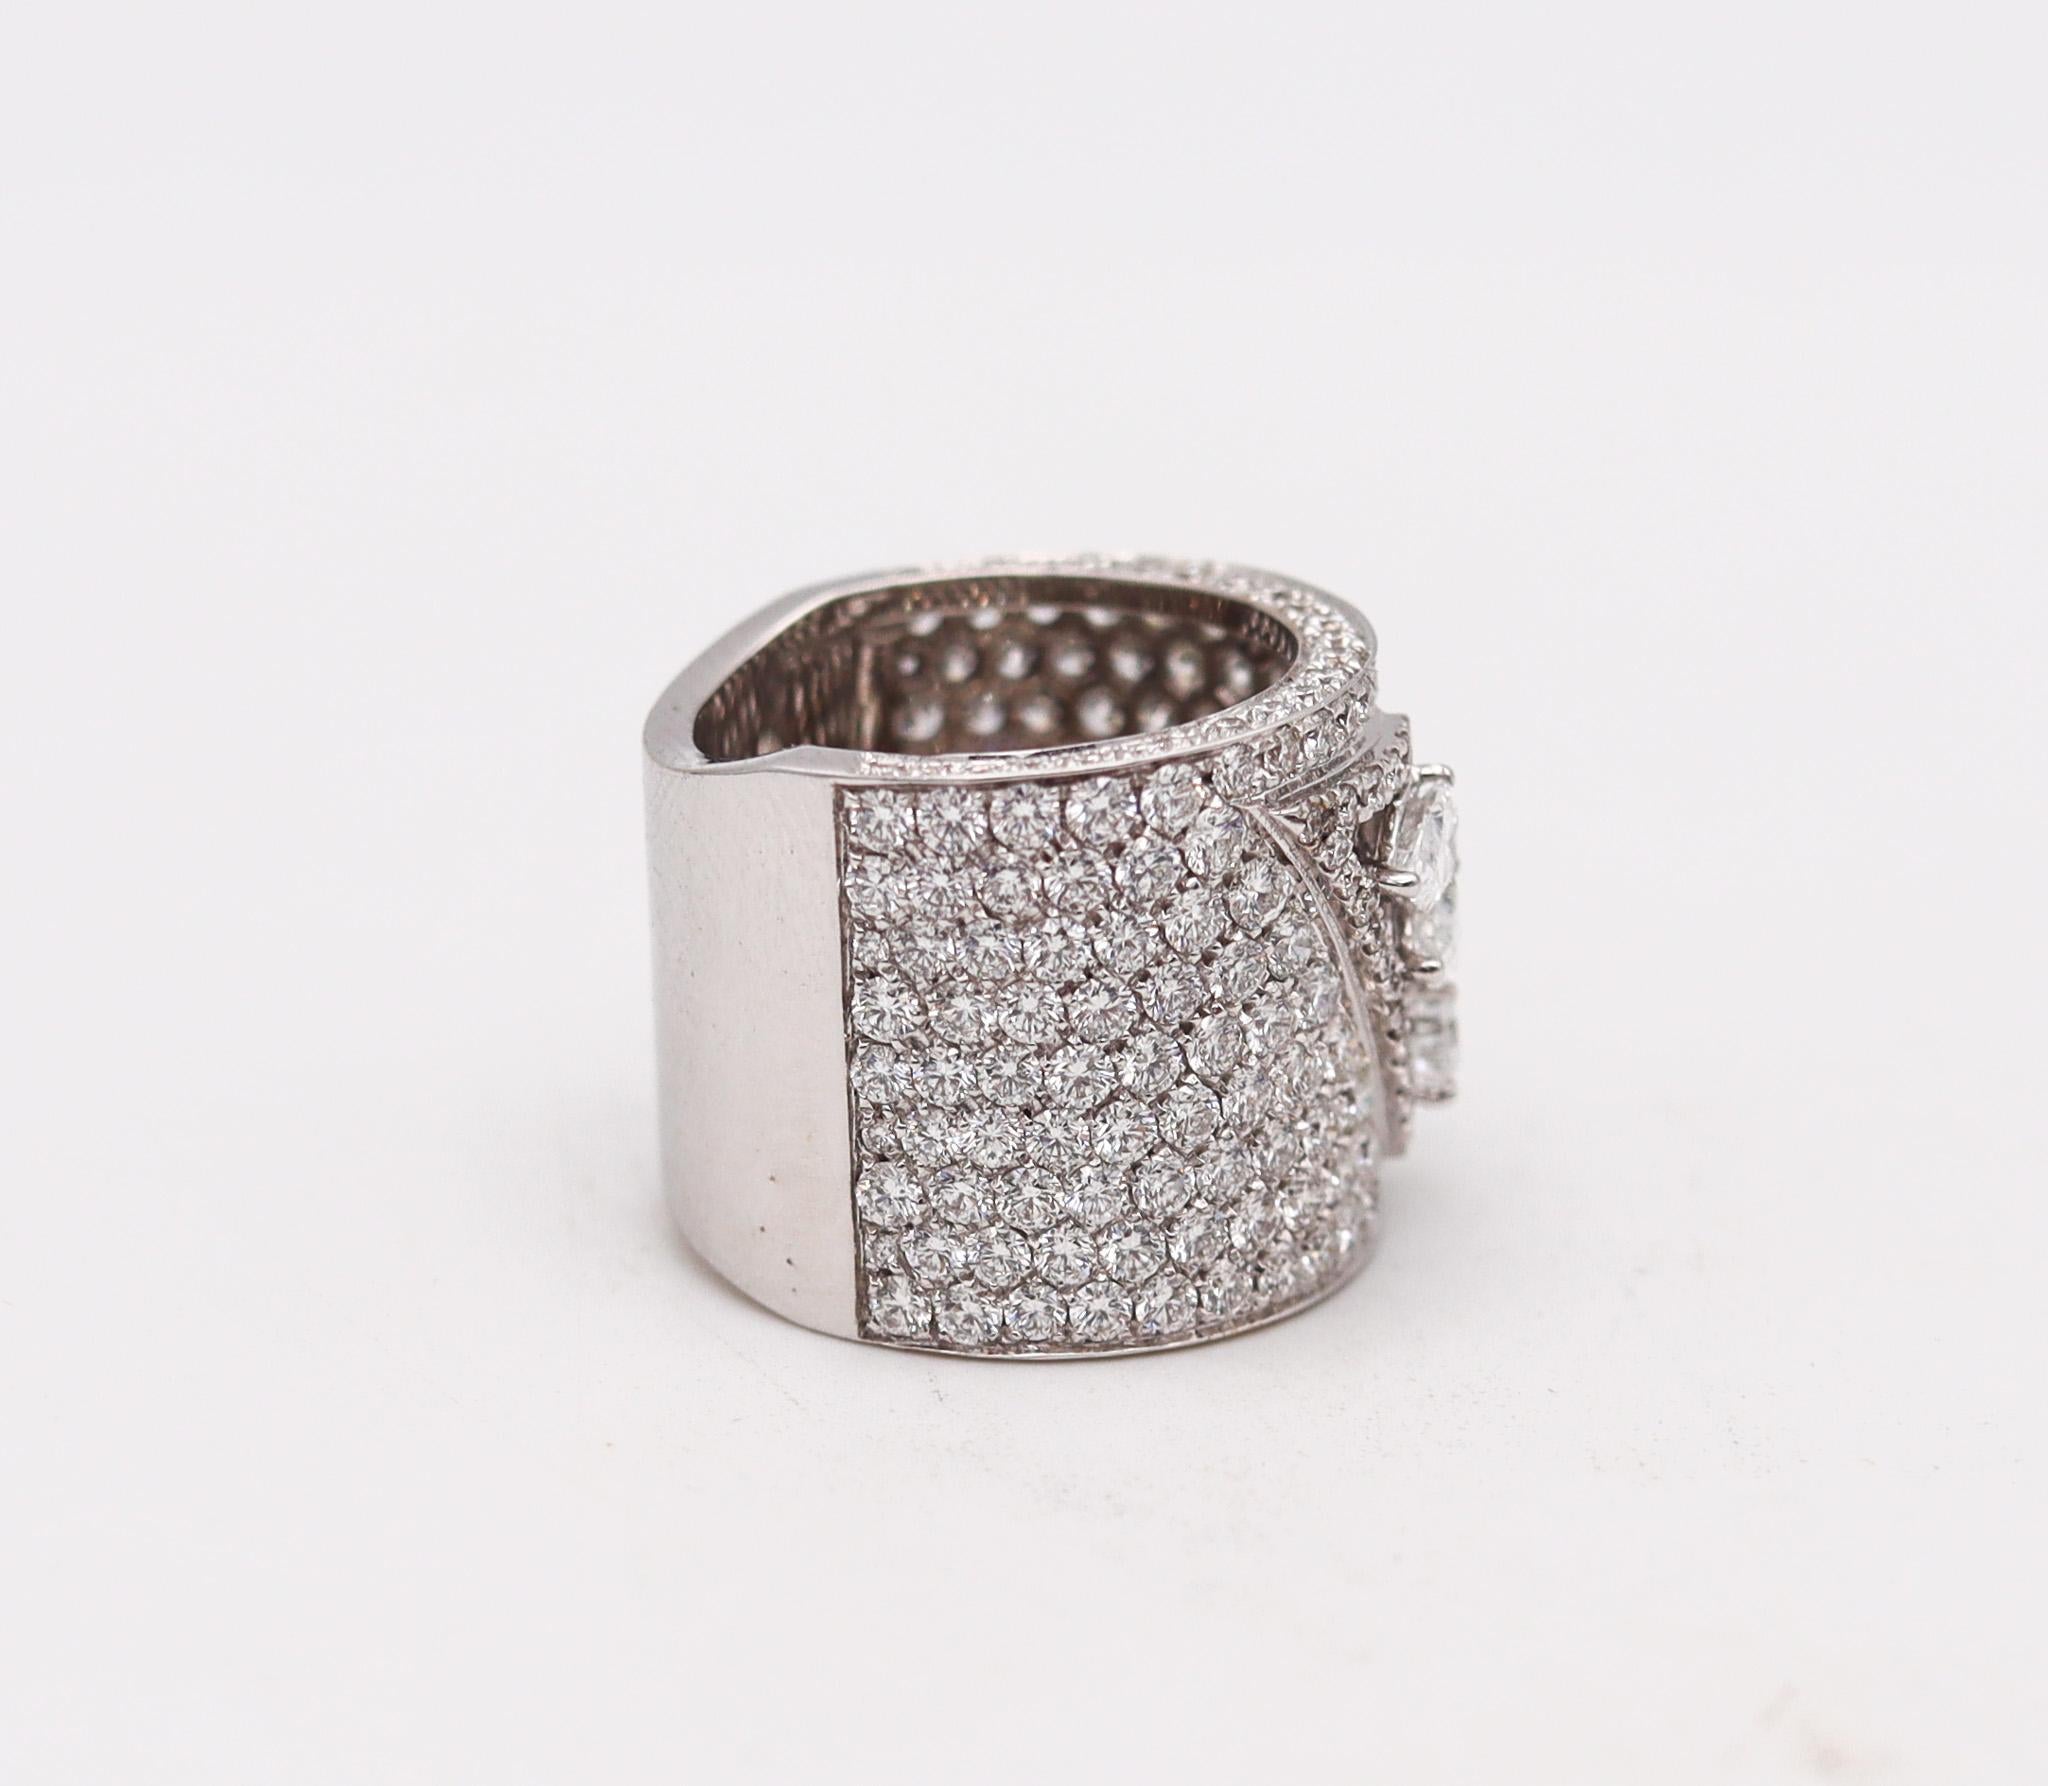 Brilliant Cut Graff Cocktail Ring Band in 18kt White Gold with 6.38ctw in VS Diamonds